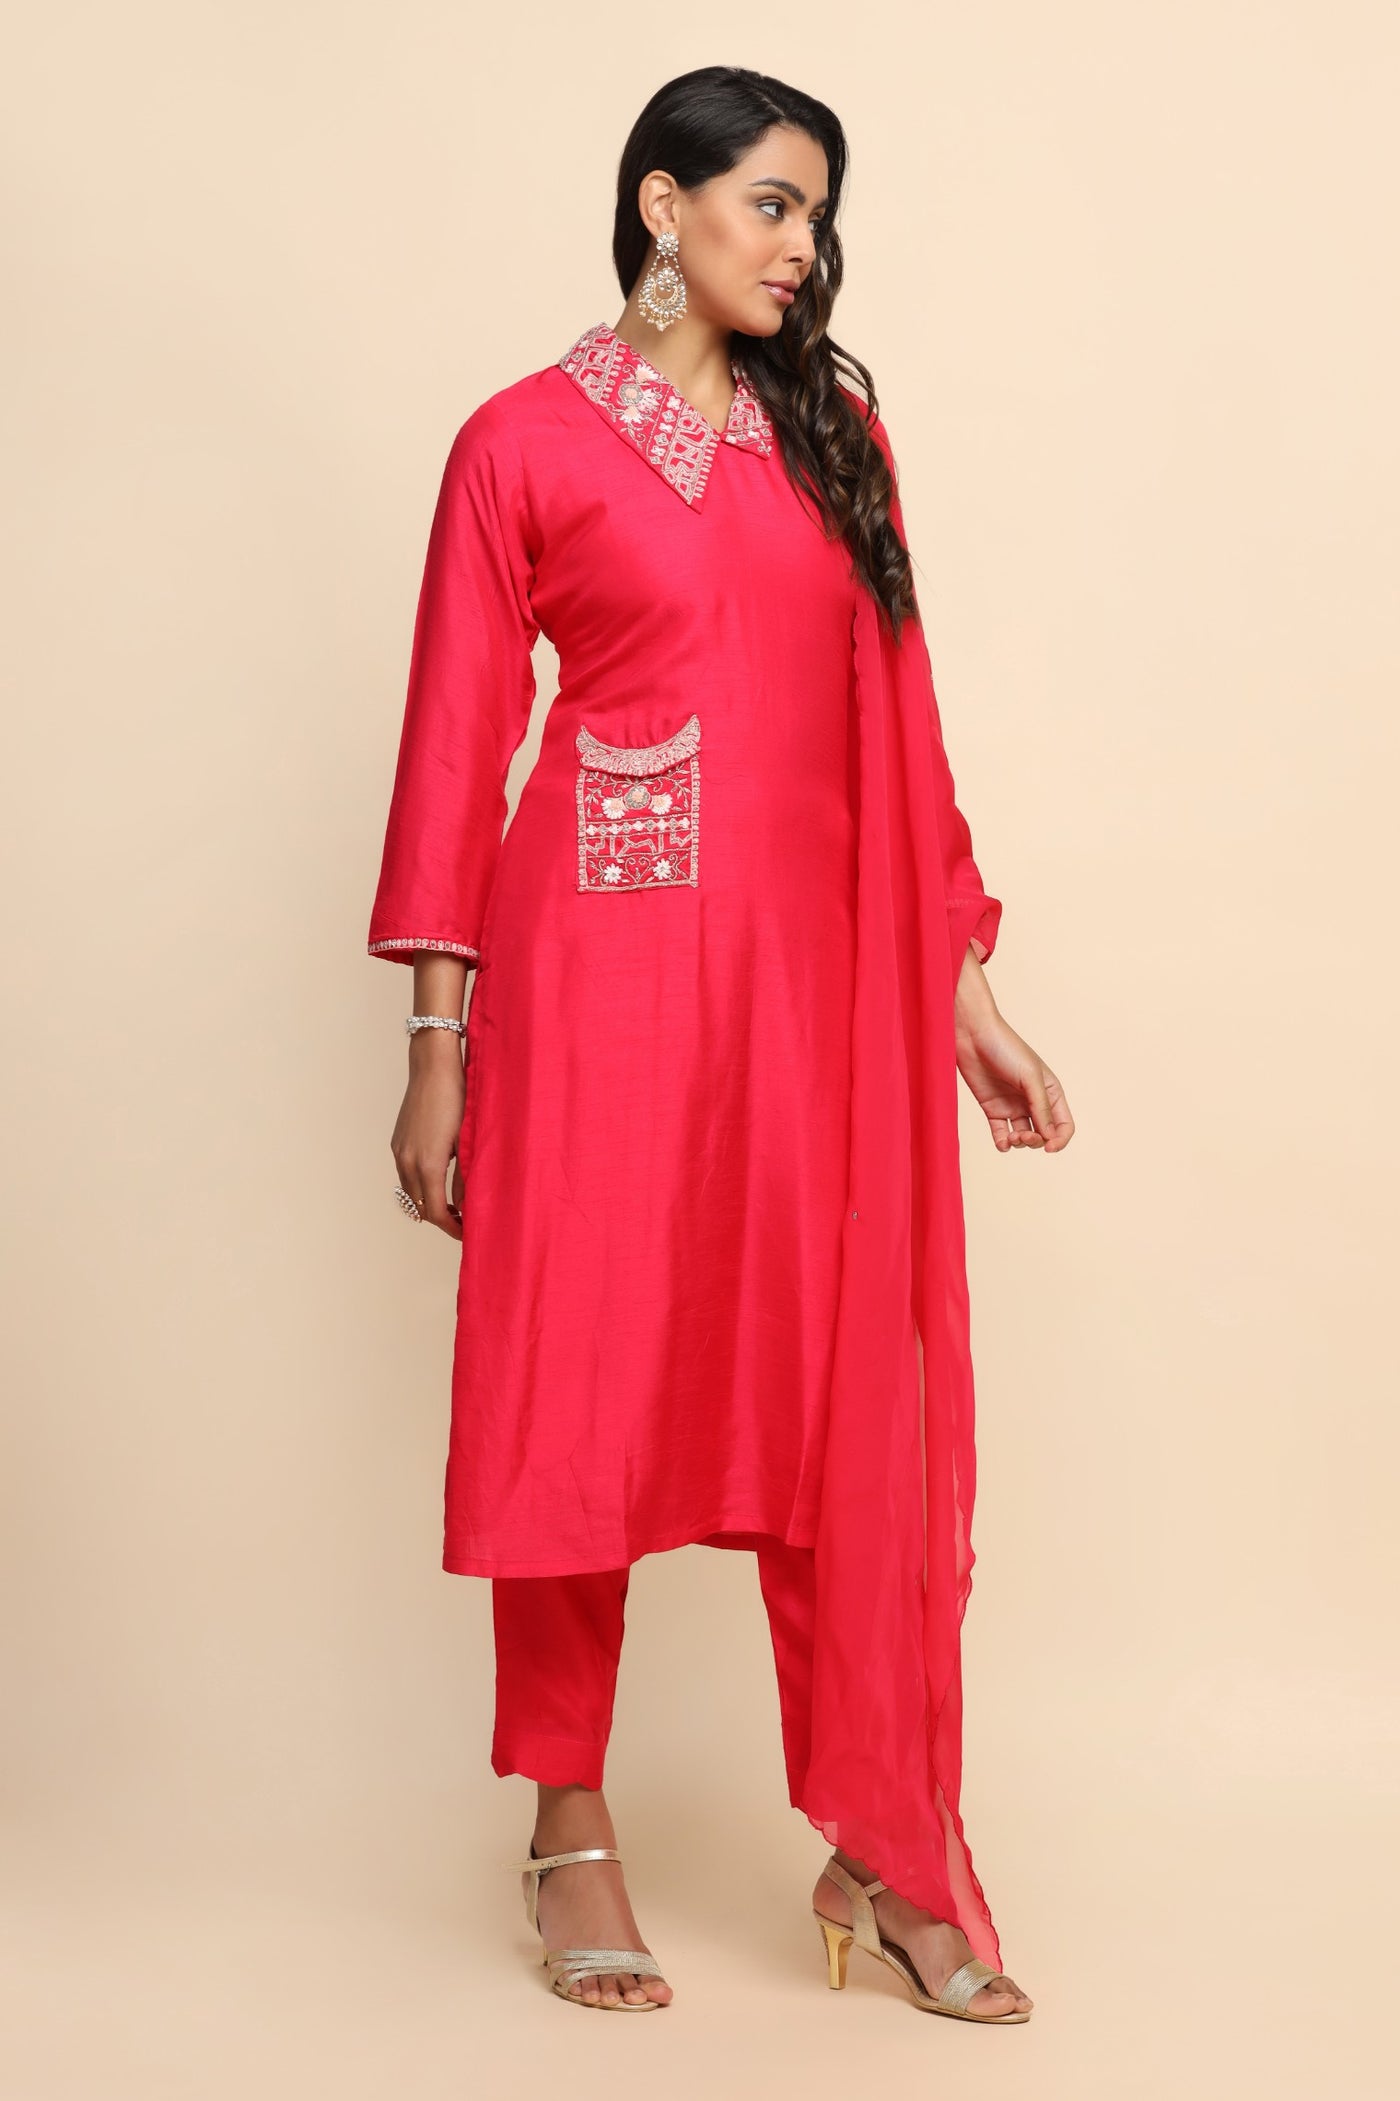 Beautiful wine color floral motif embroidered kurti